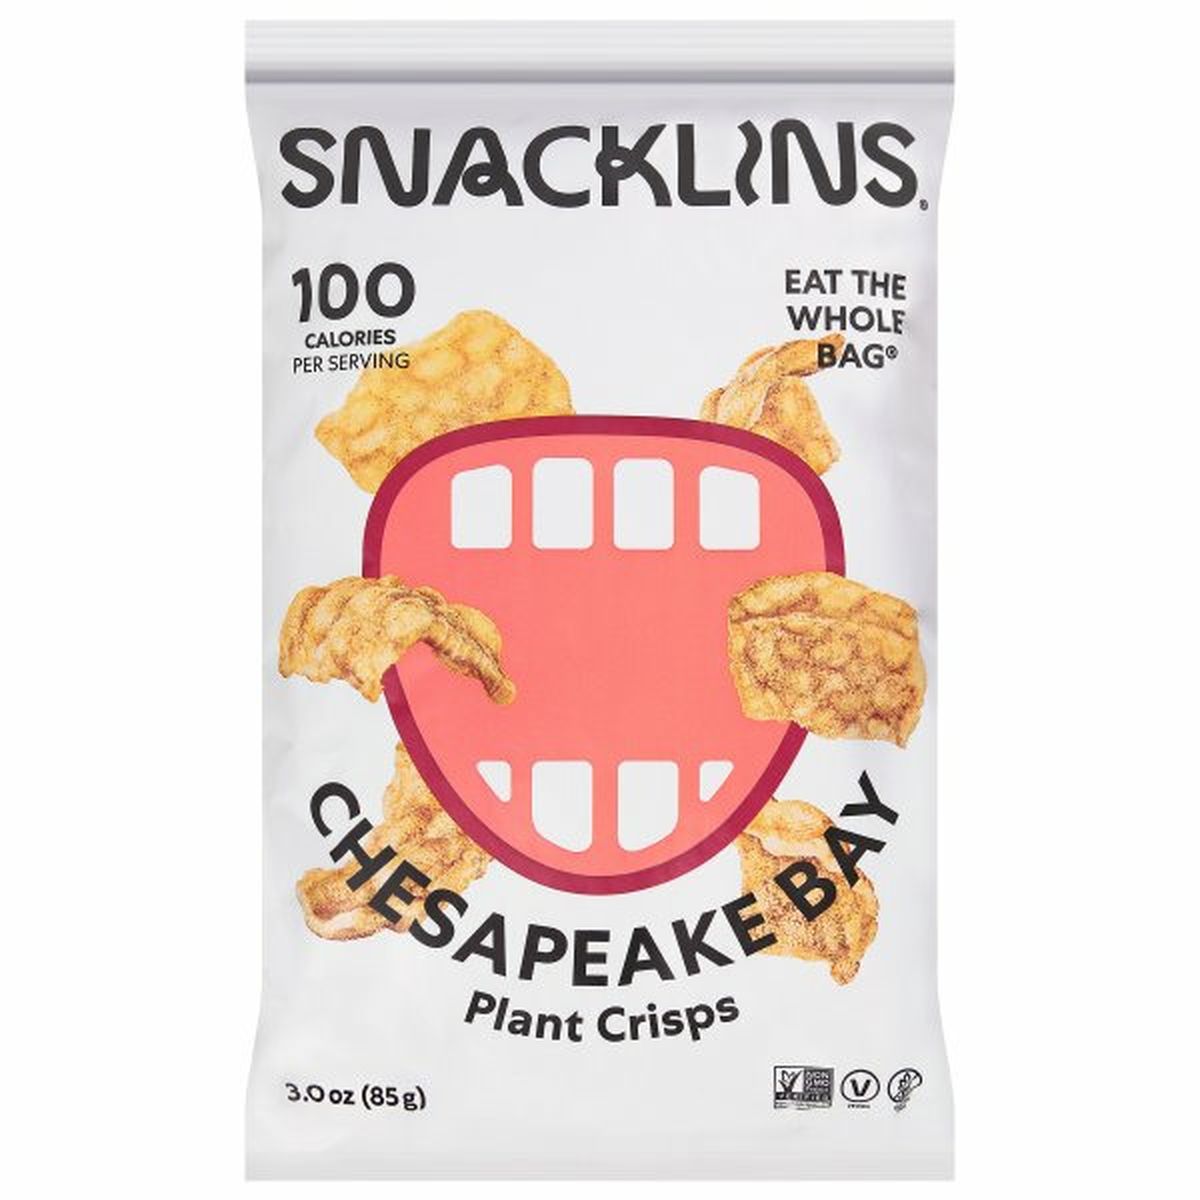 Calories in Snacklins Plant Crisps, Chesapeake Bay